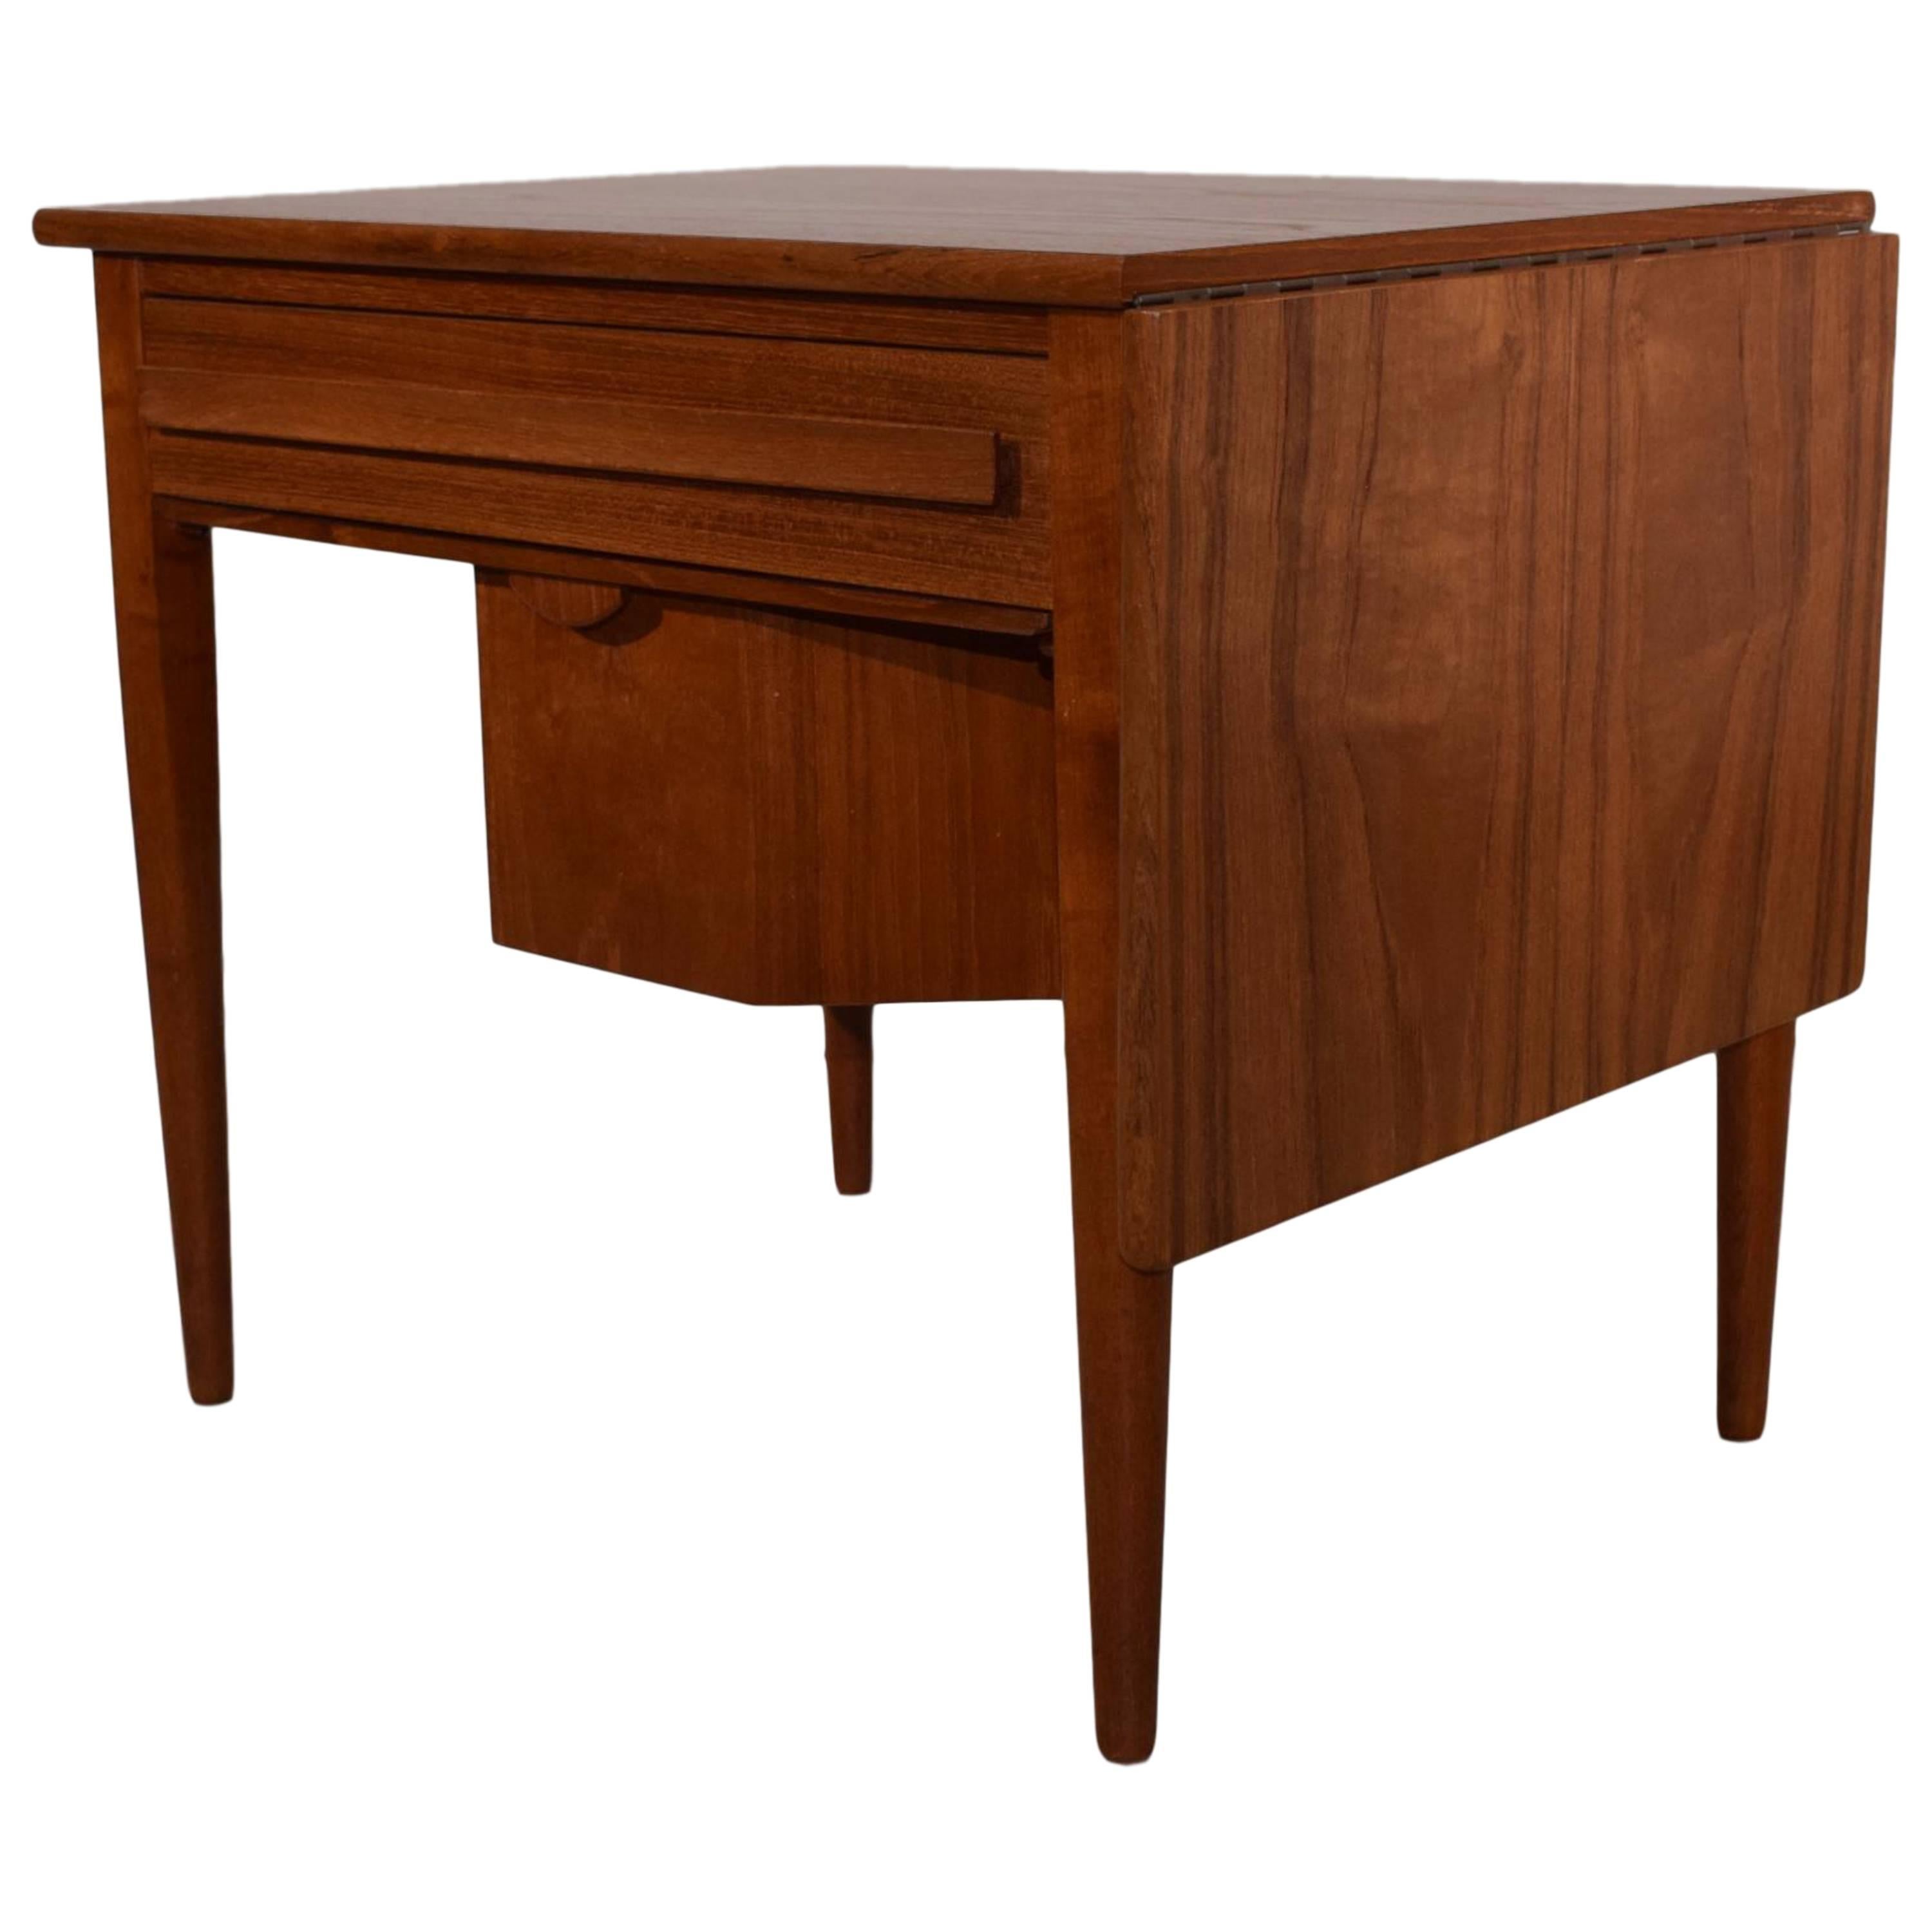 Danish Midcentury Sewing Table with Drop-Leaf by Johannes Andersen, Teak For Sale